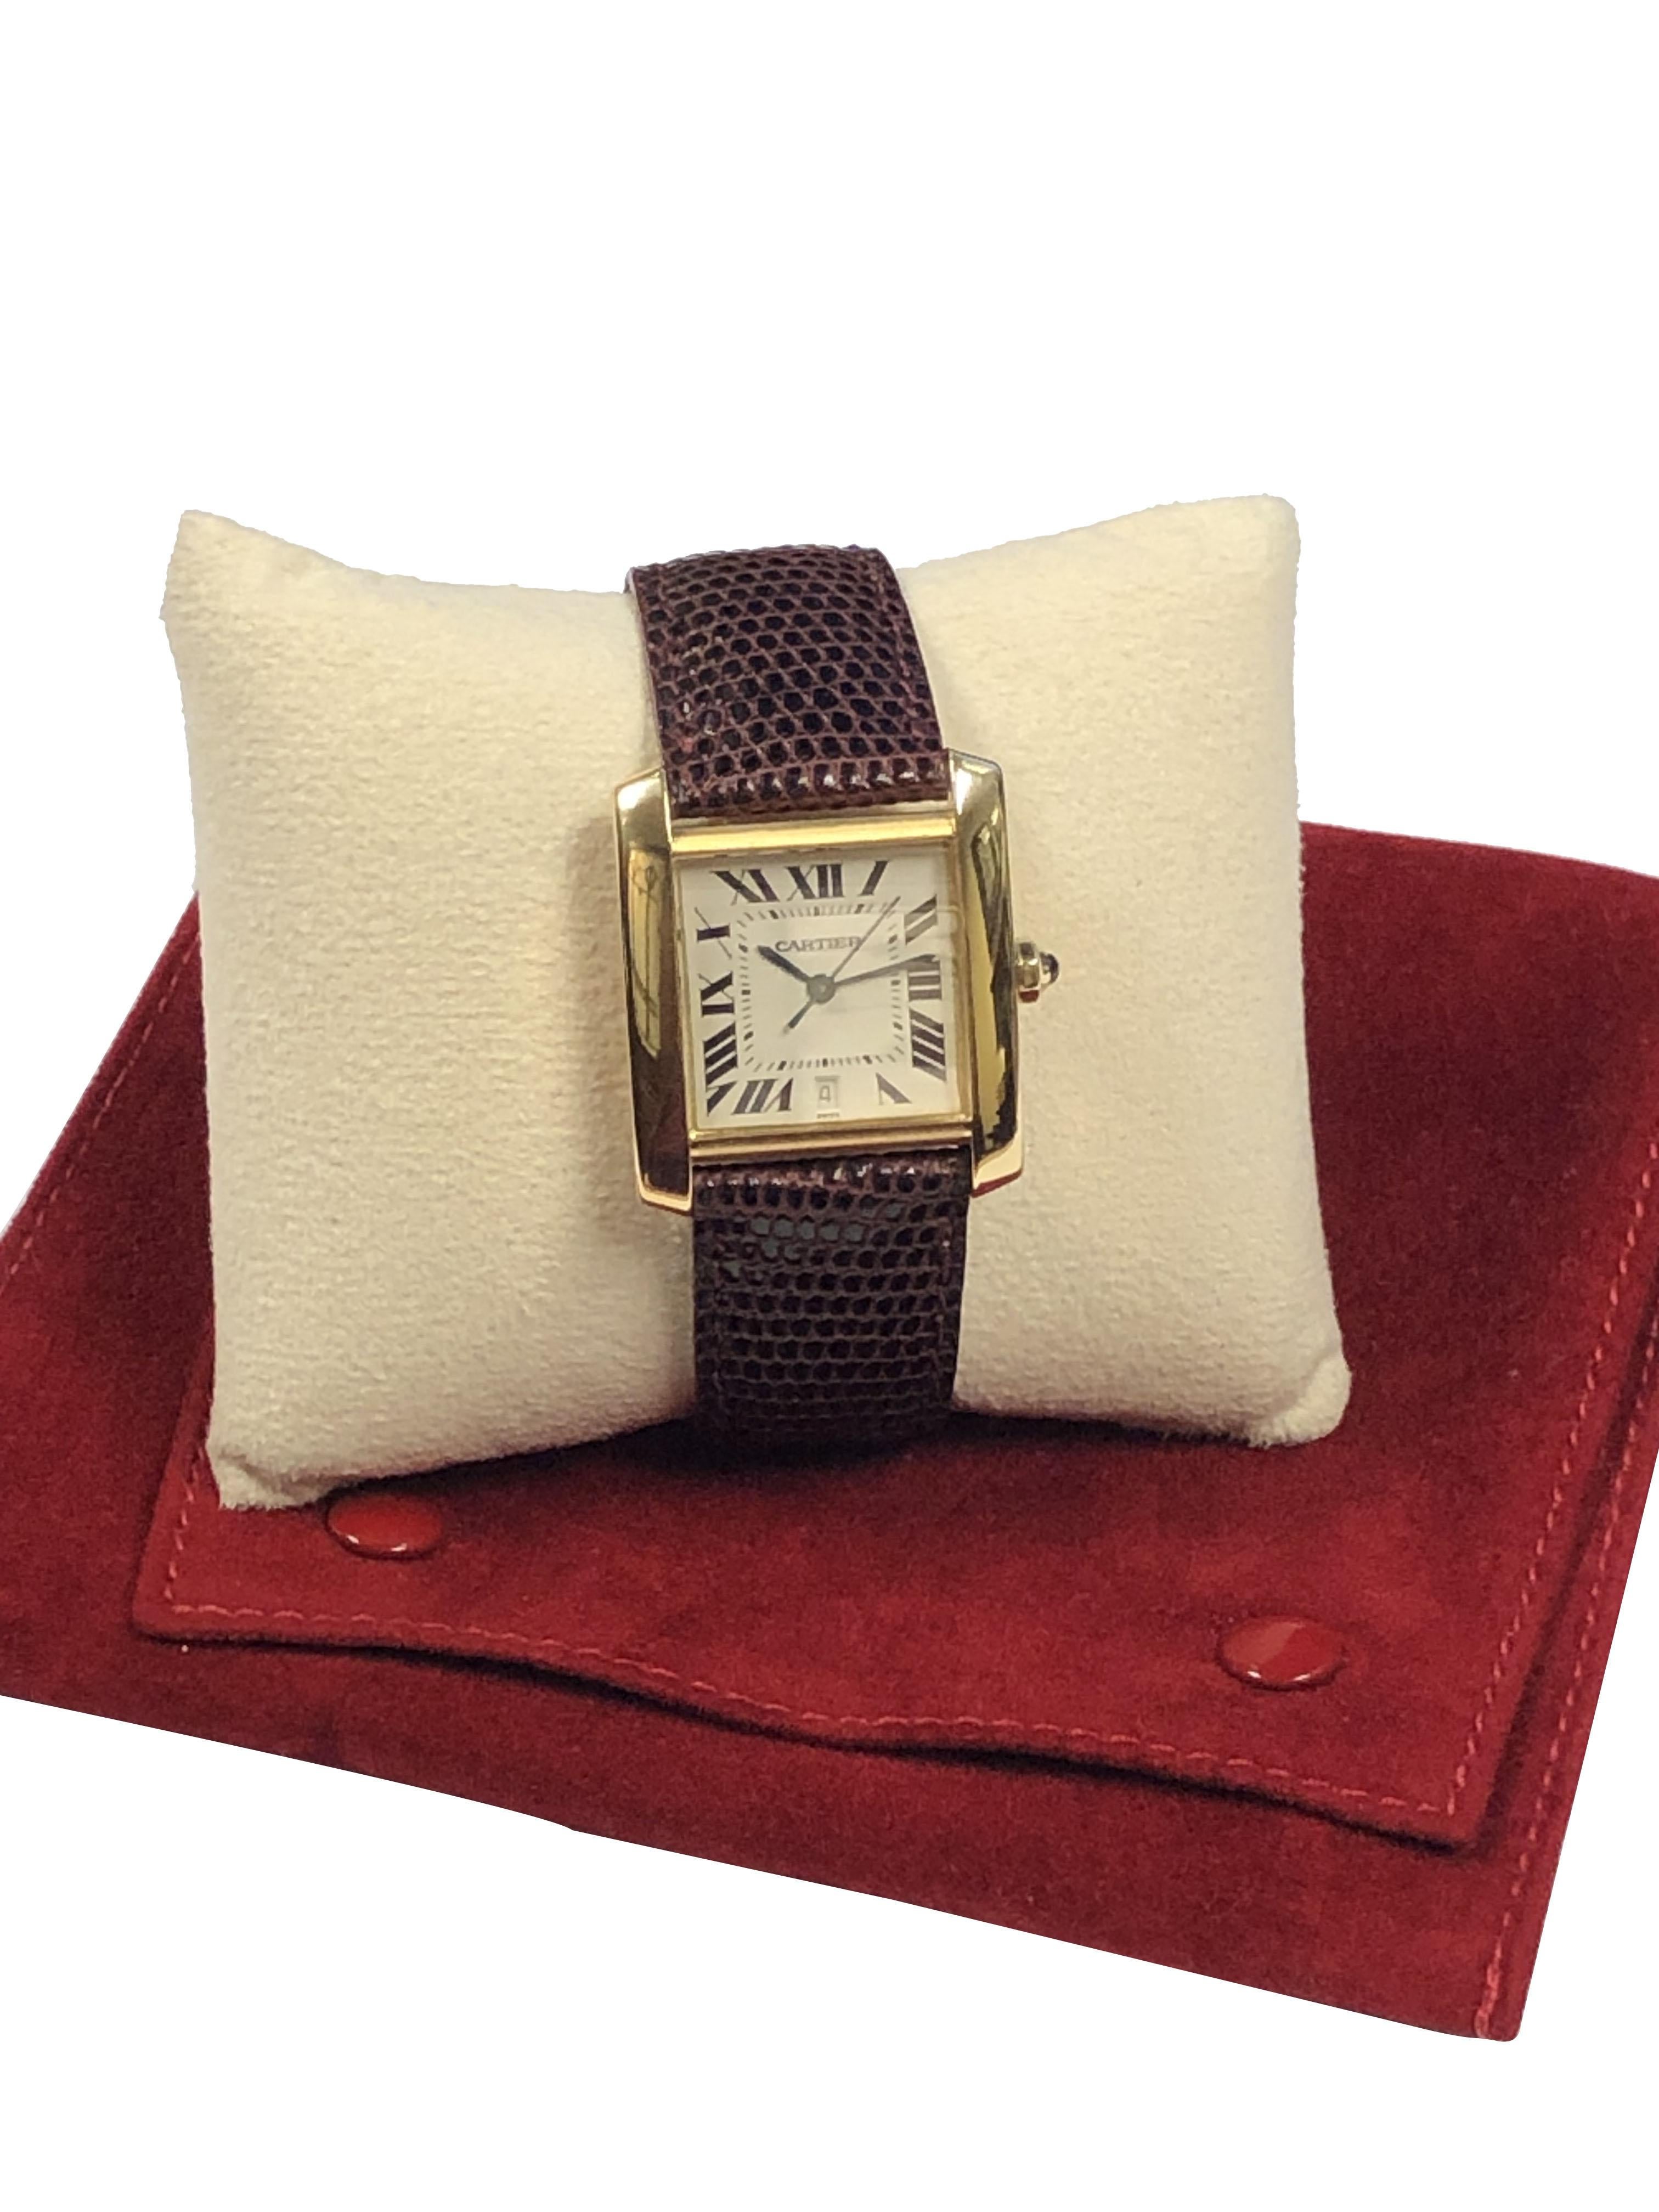 Cartier Tank Francaise Ref 1840 Large Yellow Gold Automatic Wrist Watch In Excellent Condition For Sale In Chicago, IL